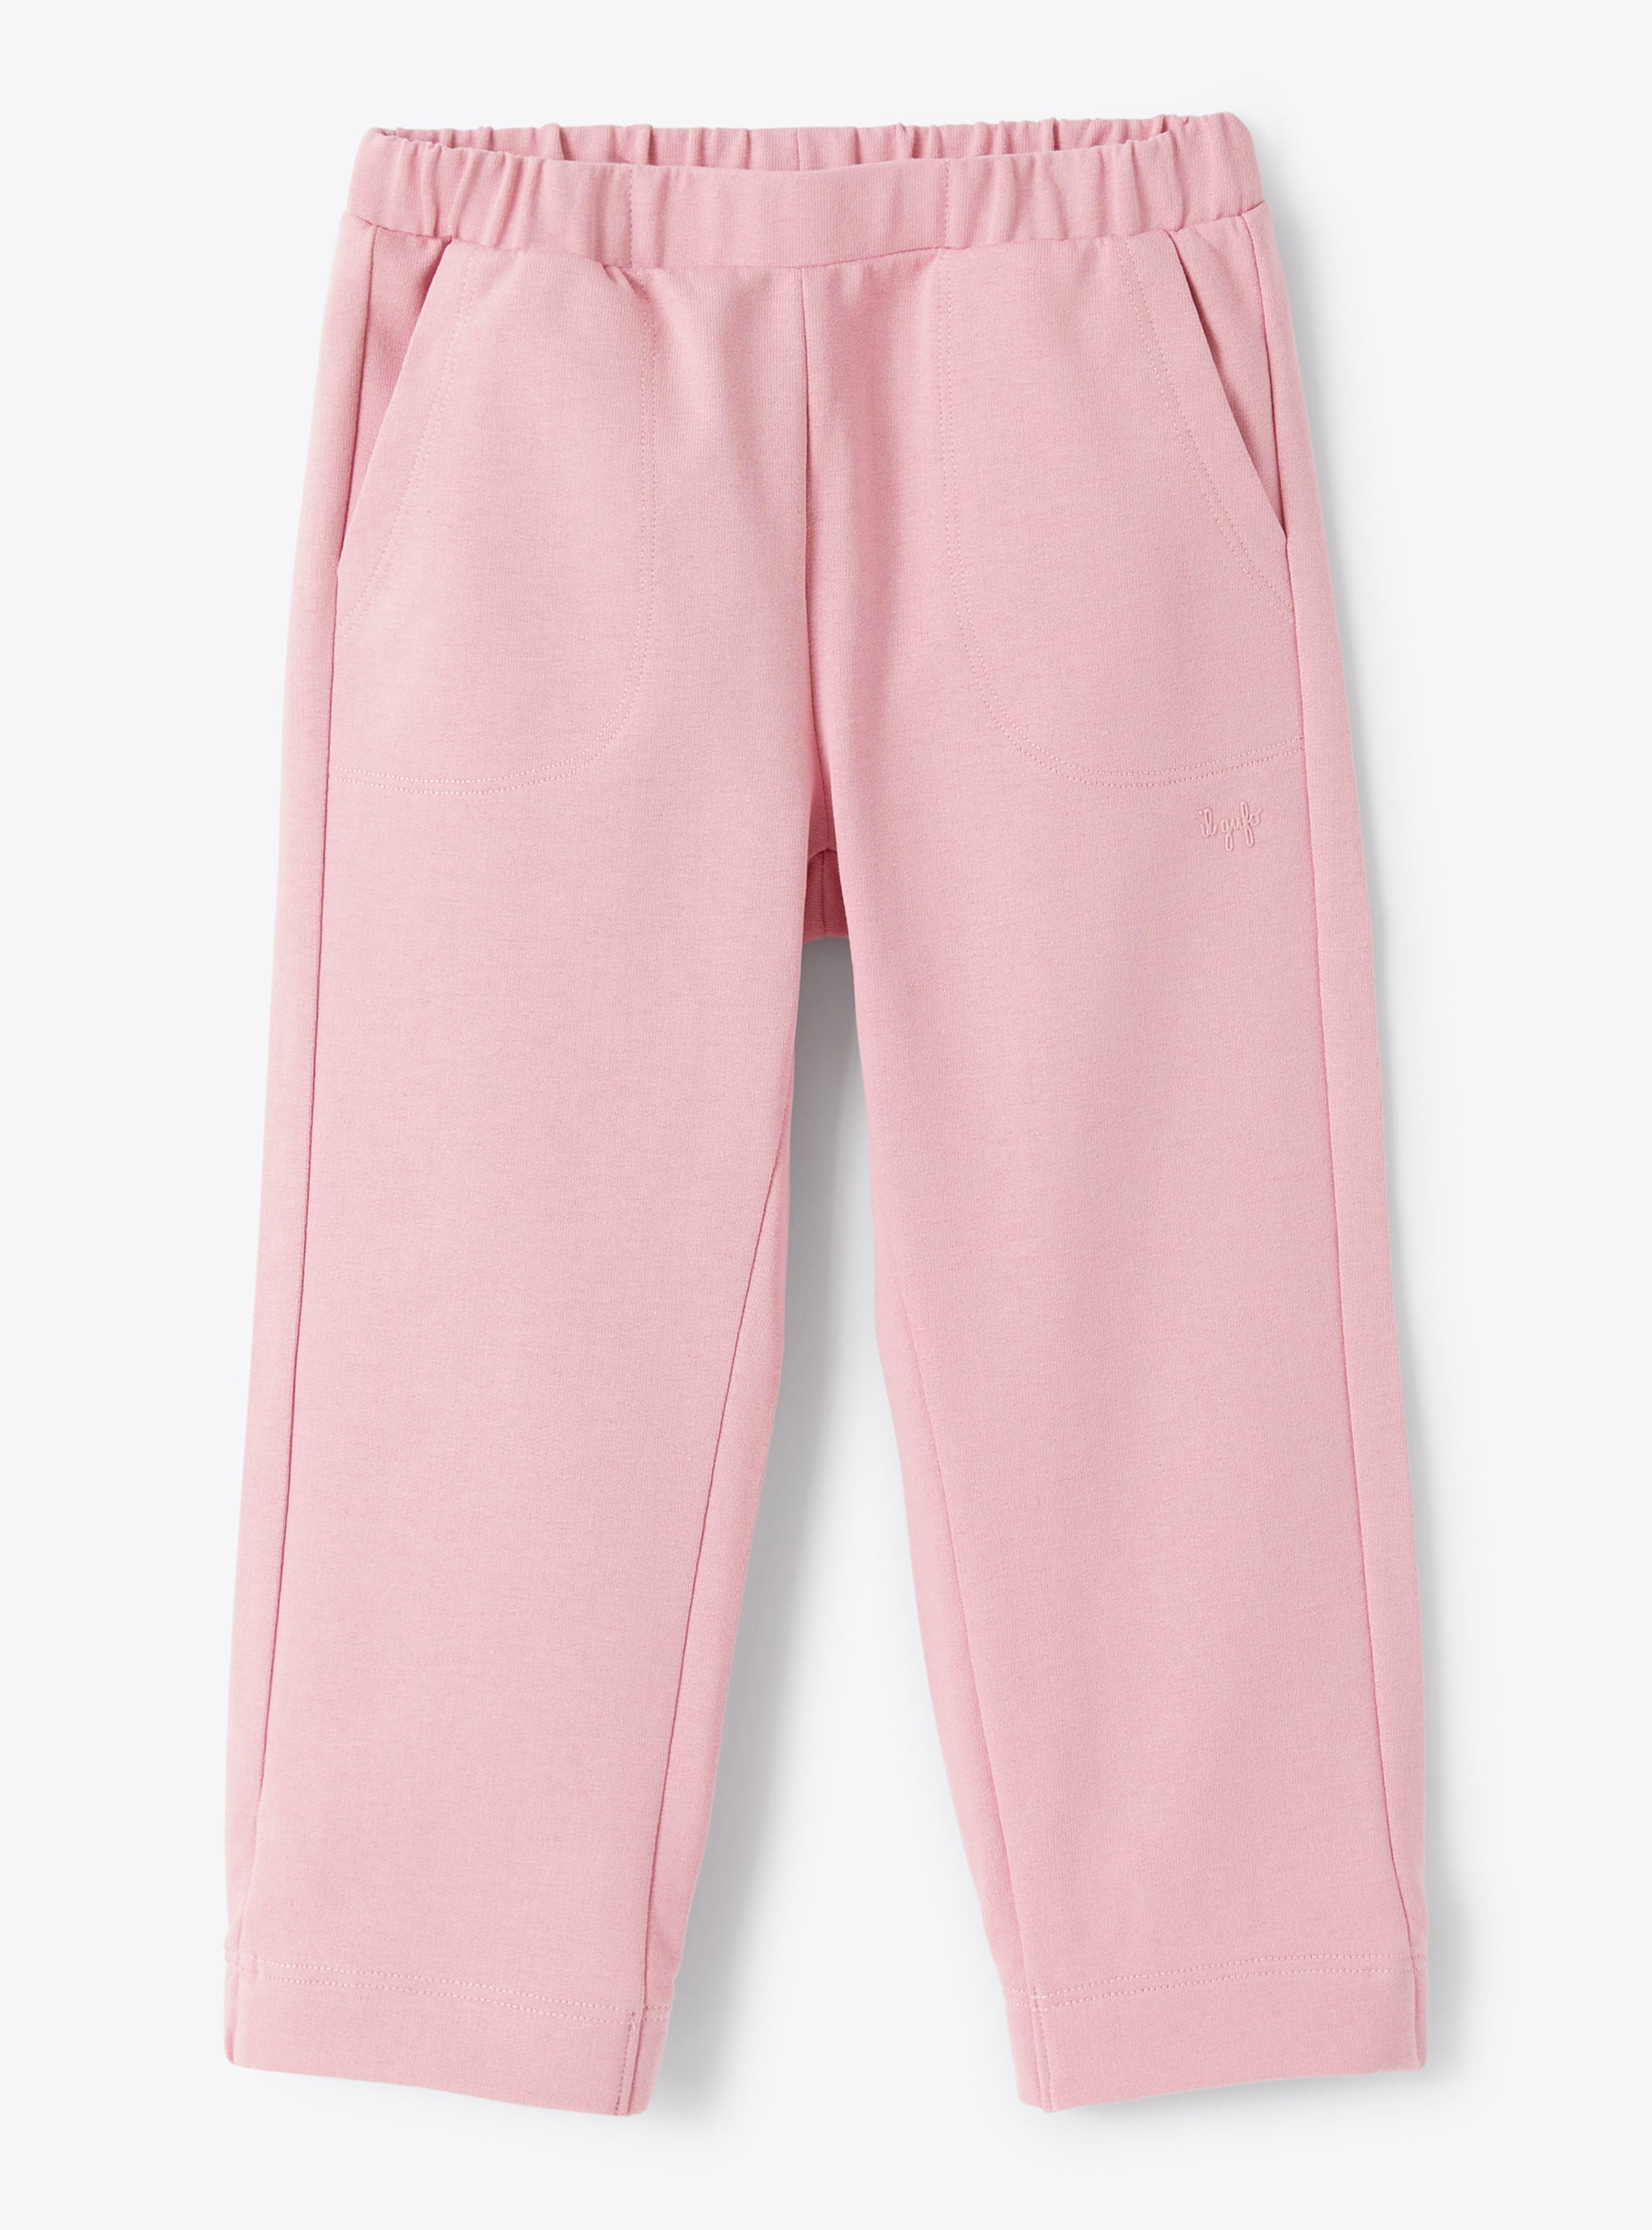 Sweatpants in pink - Trousers - Il Gufo